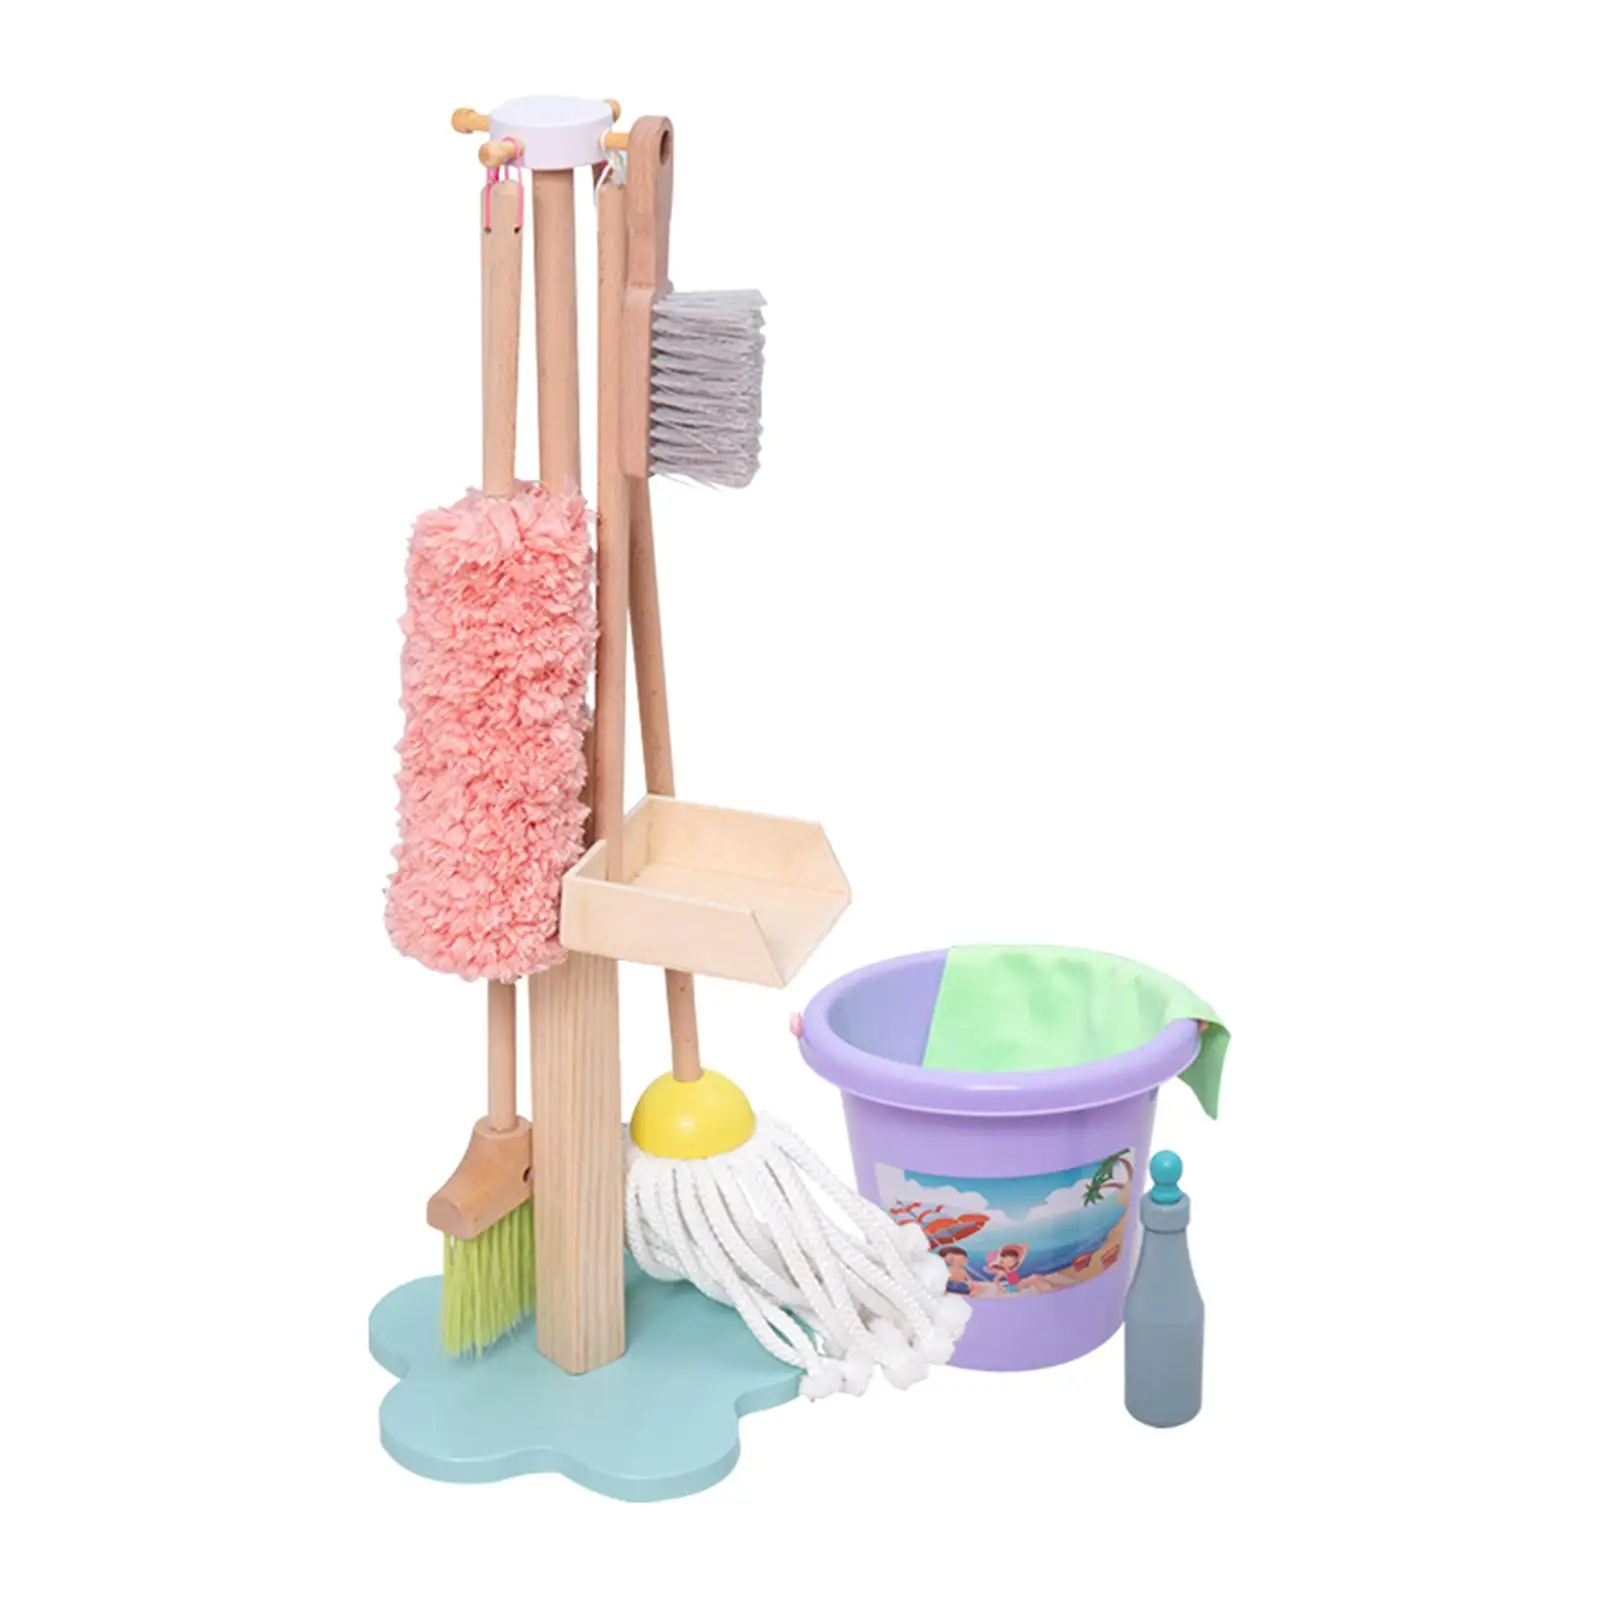 9 Pieces Simulation Children Cleaning Tools House Cleaning Toys Hanging Stand Brush Dustpan Pretend Play for Children Boys Gifts